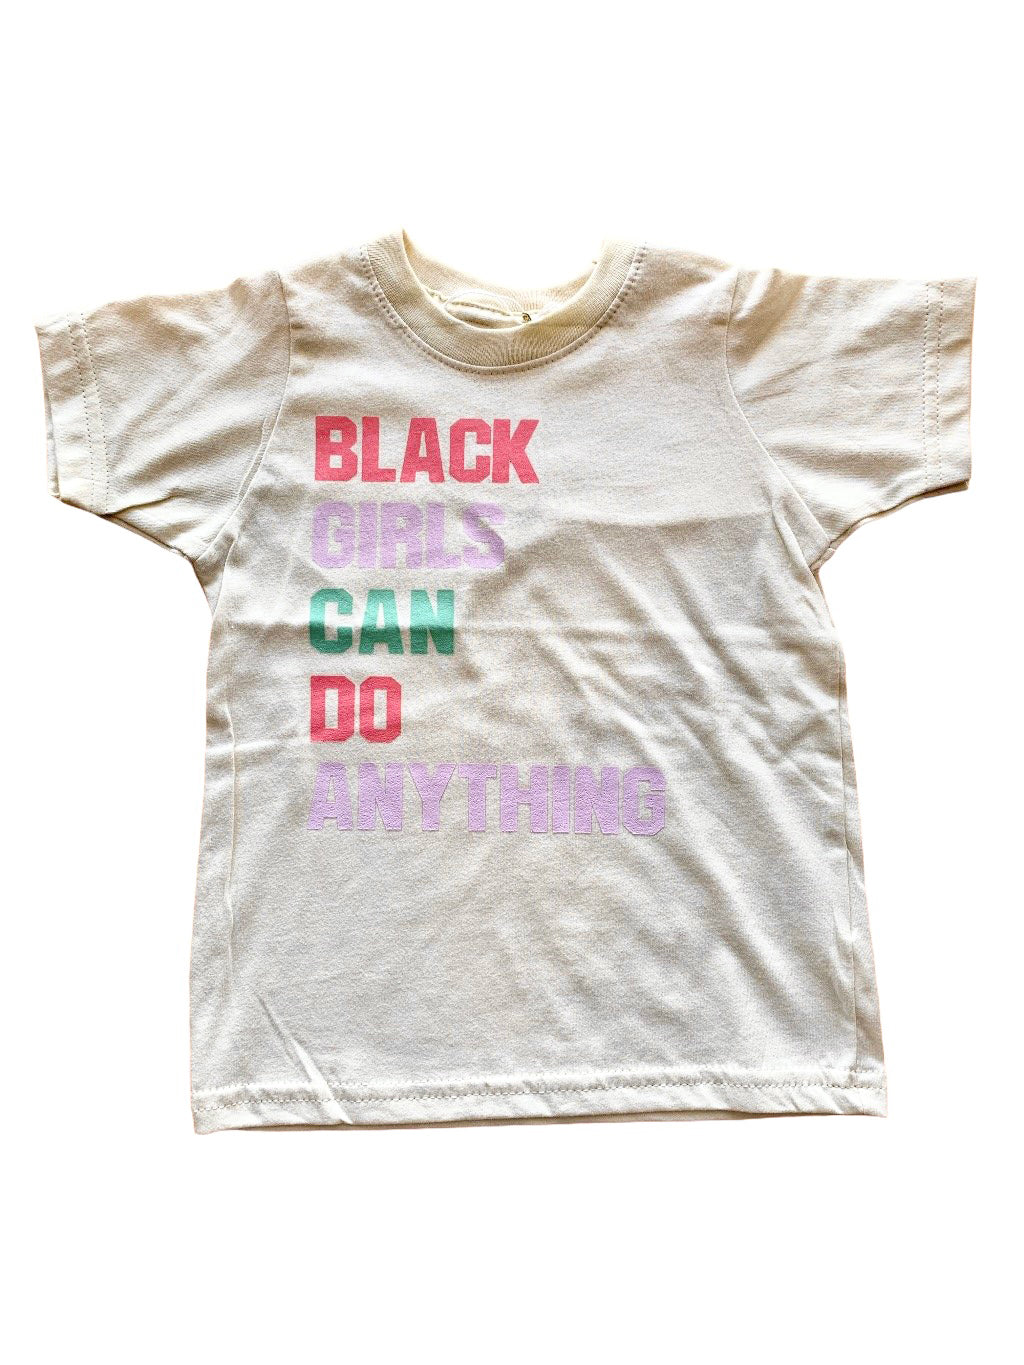 Typical Black Tee Black Girls Can Do Anything Tee